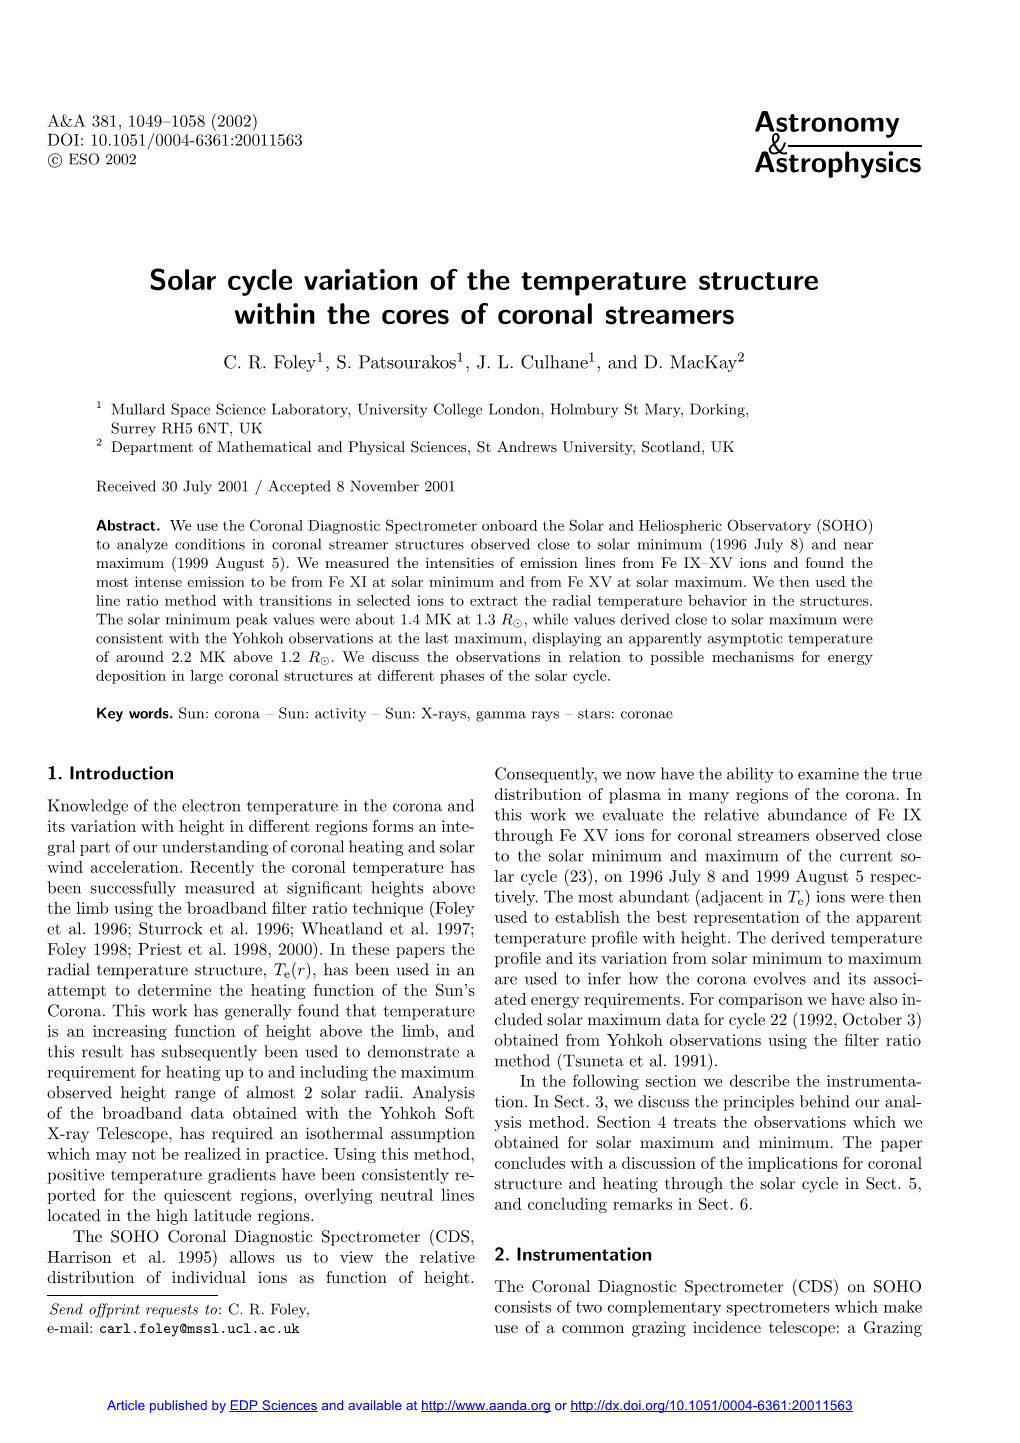 Solar Cycle Variation of the Temperature Structure Within the Cores of Coronal Streamers